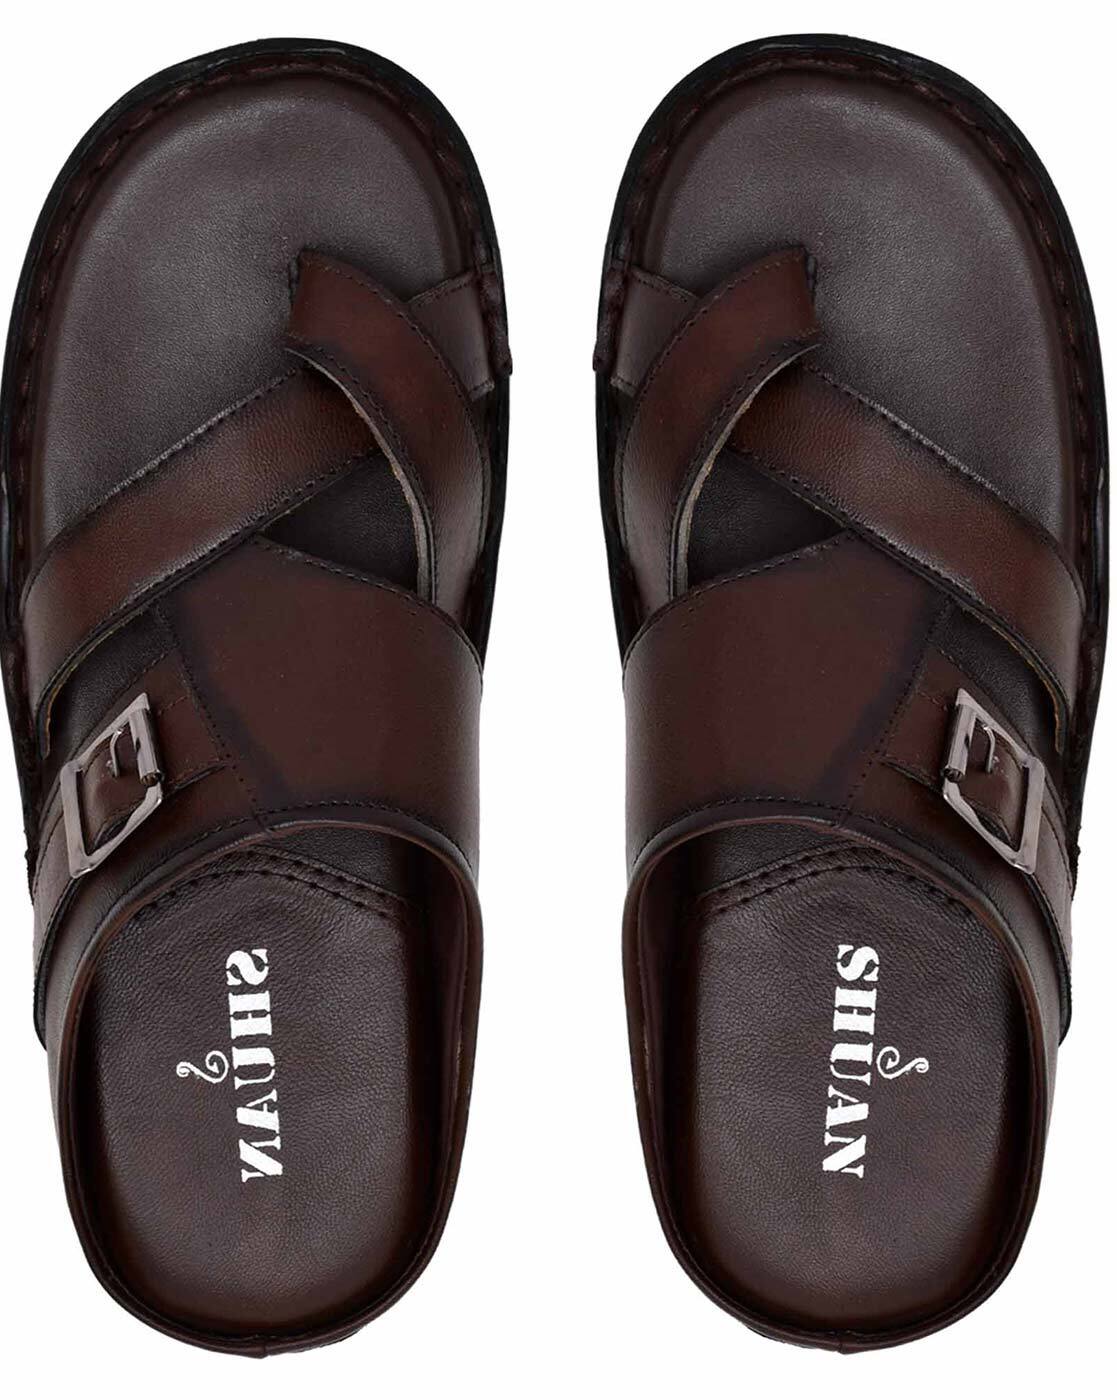 Wabi Grey Slippers for Men - Fall/Winter collection - Camper USA